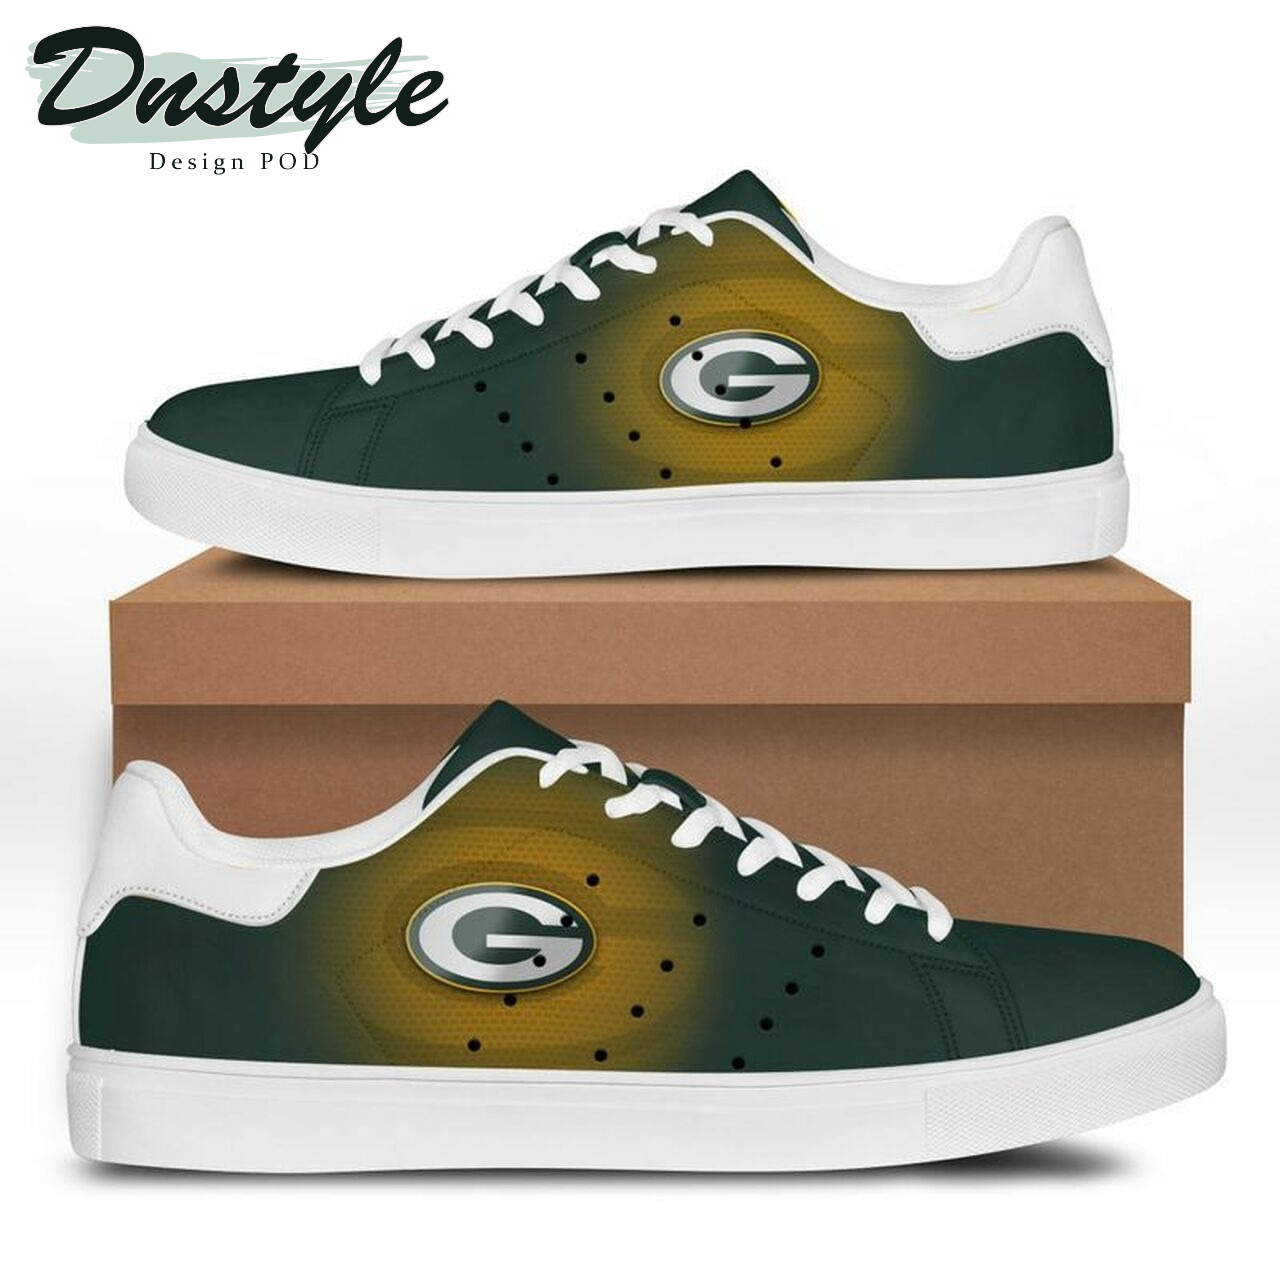 NFL stan smith low top skate shoes green bay packers